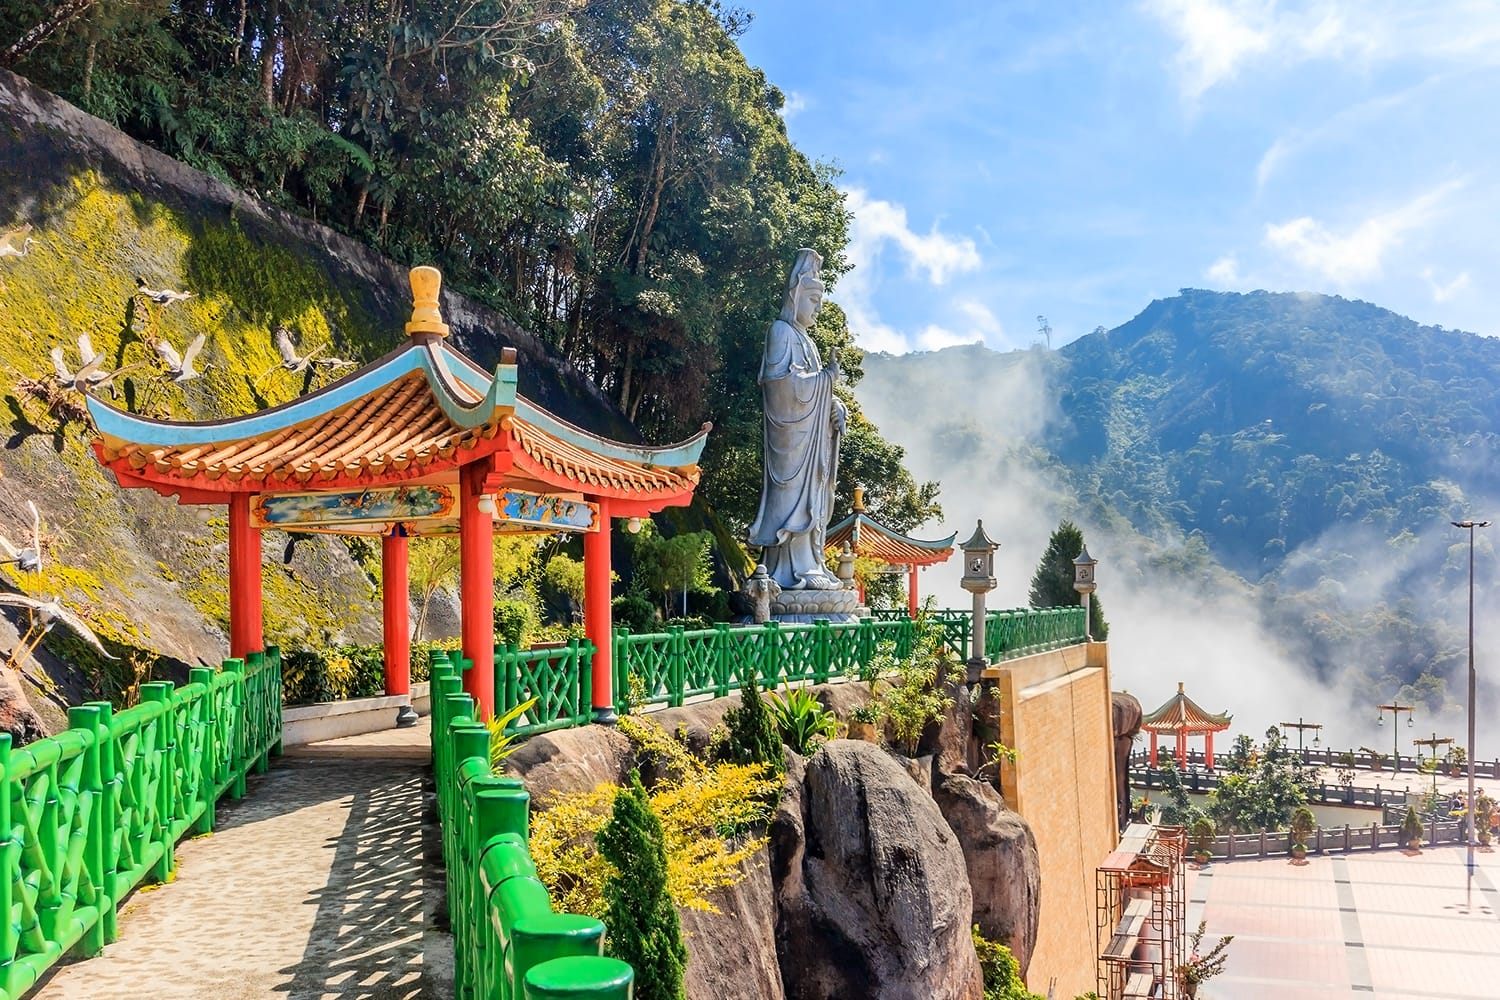 The scenic site of Chin Swee Caves Temple, Genting Highland, Malaysia. - The Chin Swee Caves Temple is situated in the most scenic site of Genting Highlands.